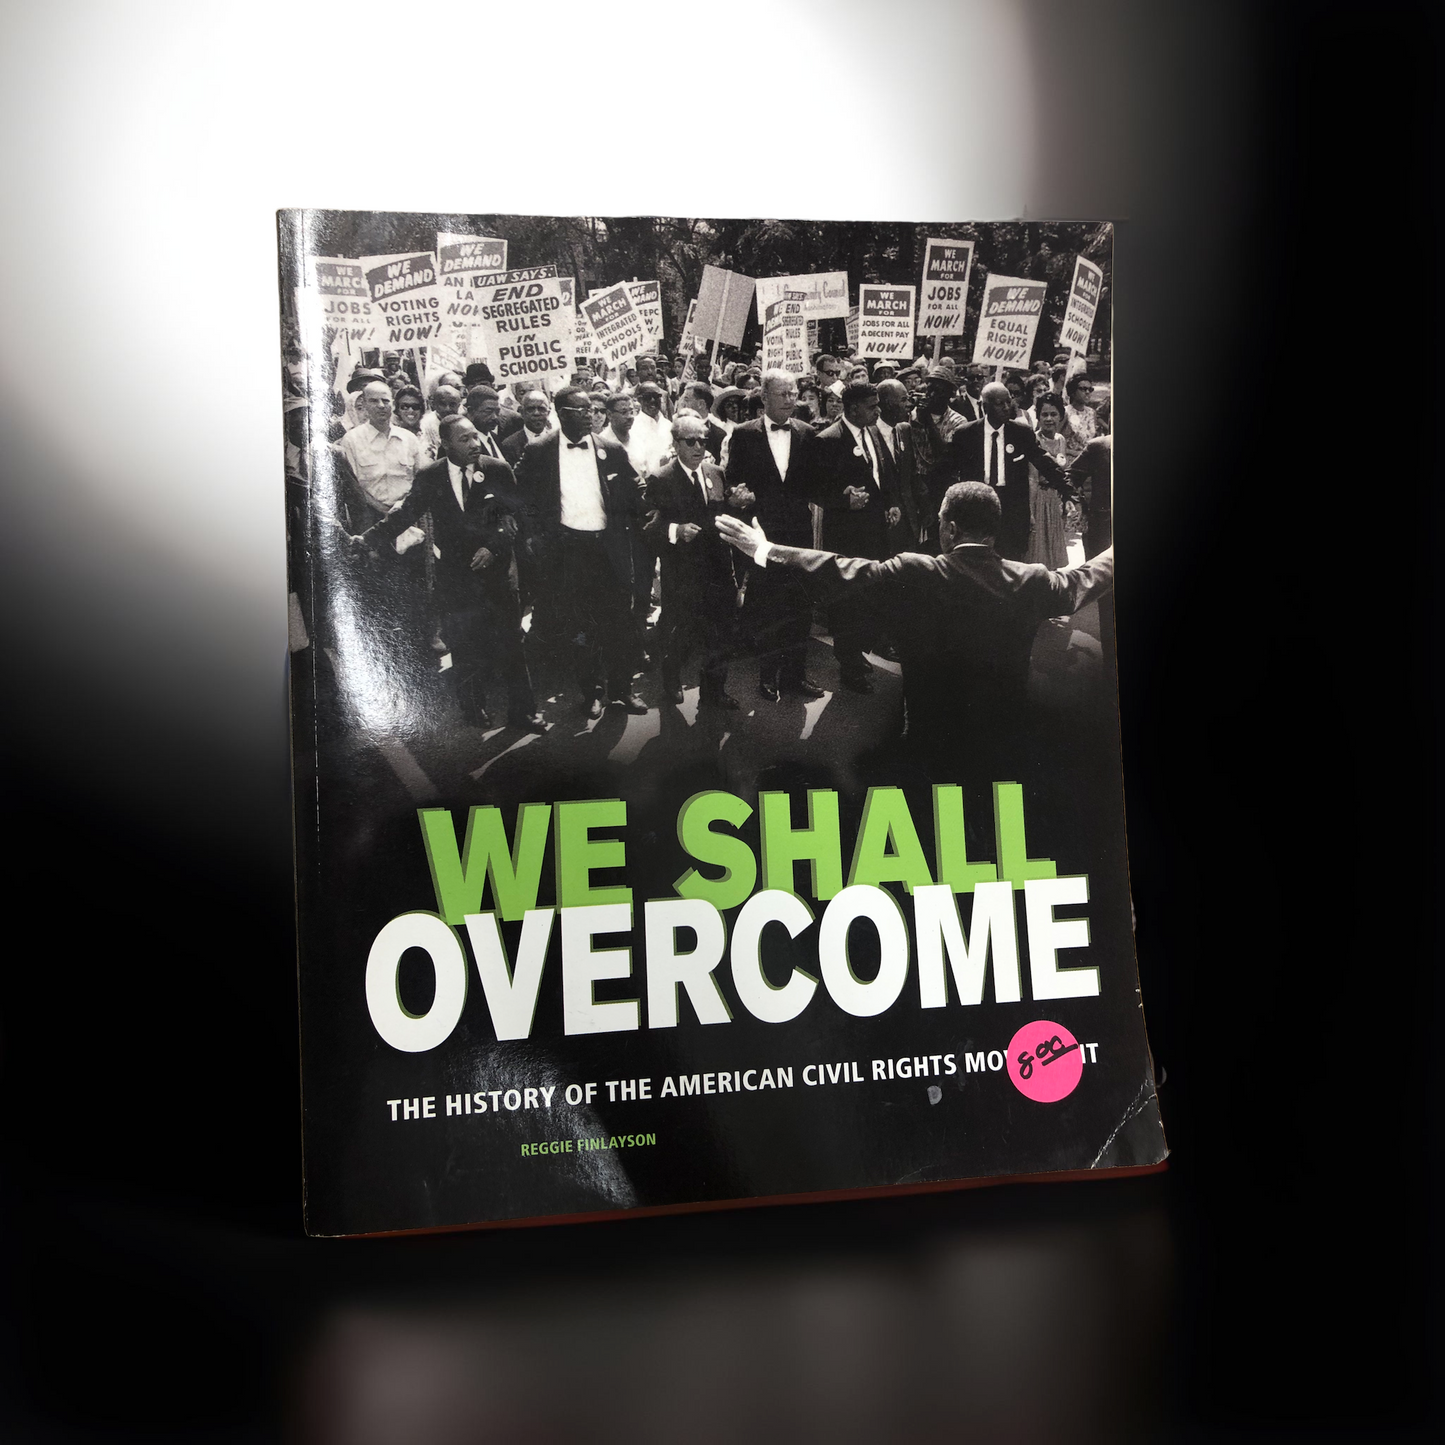 We Shall Overcome by Regie Finlayson (used book, paperback)